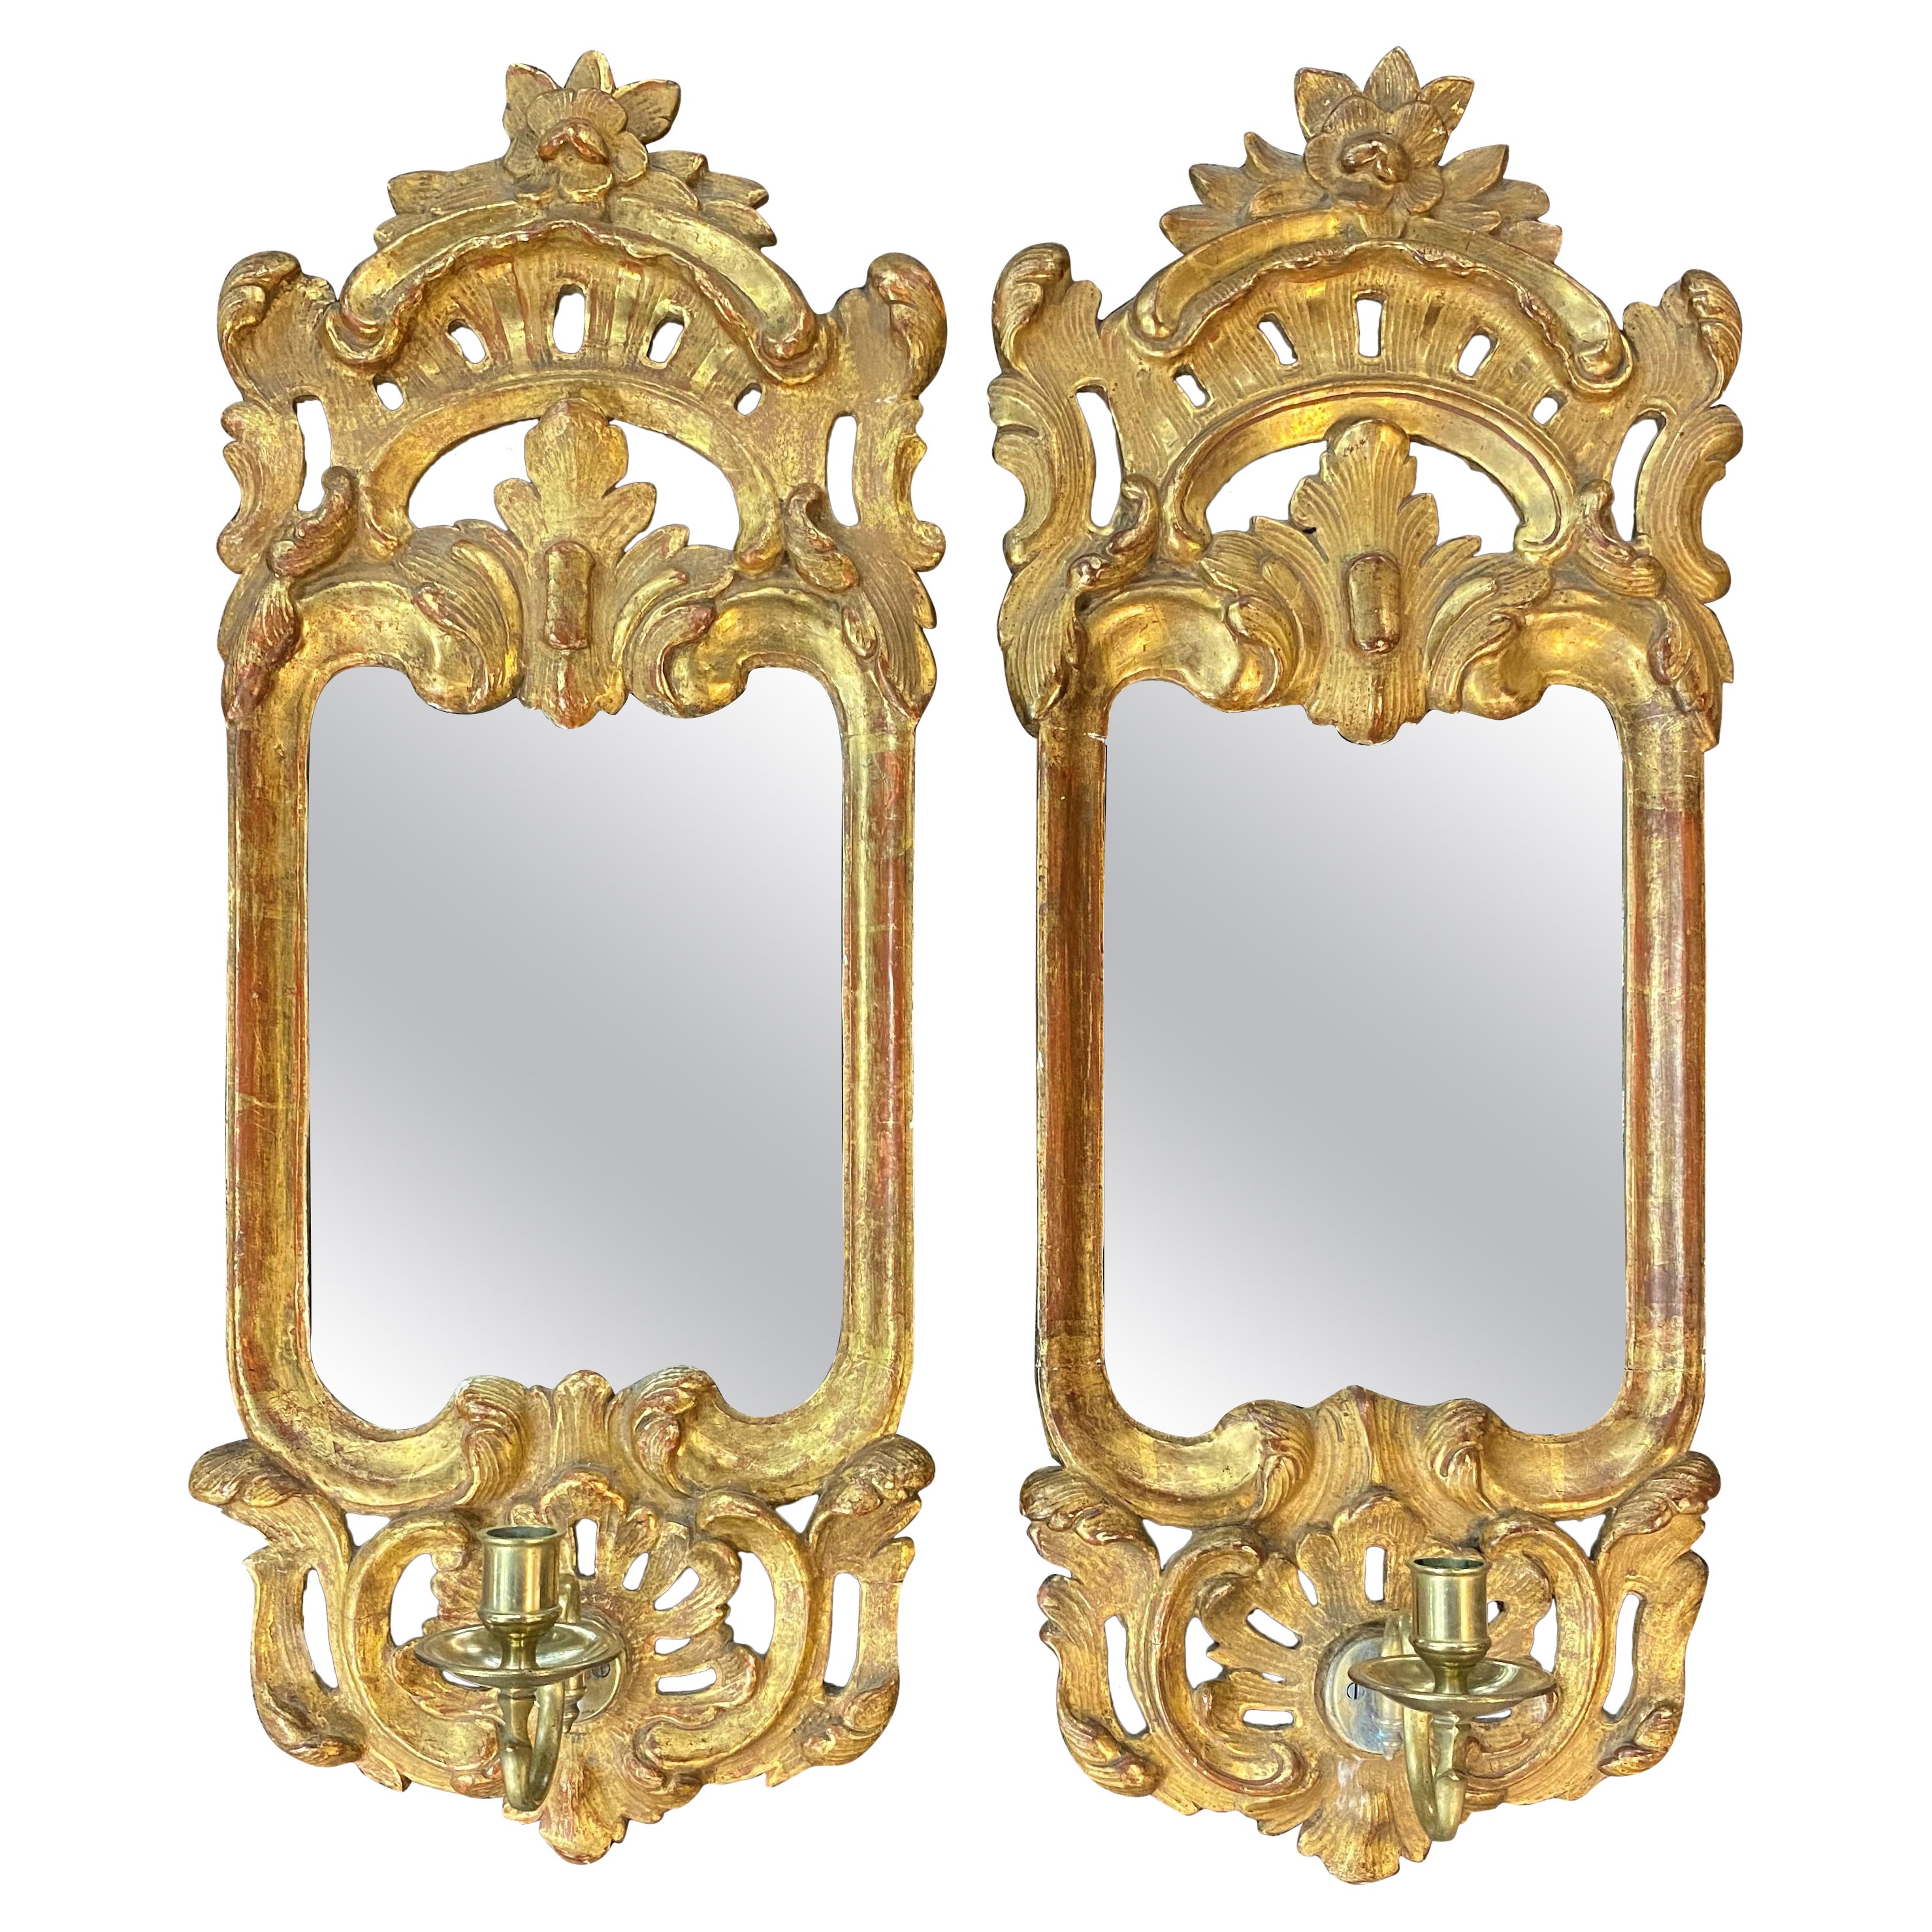 Exceptional 18th c Pair of Gilded Girandole Mirrored Sconces, Likely Swedish For Sale